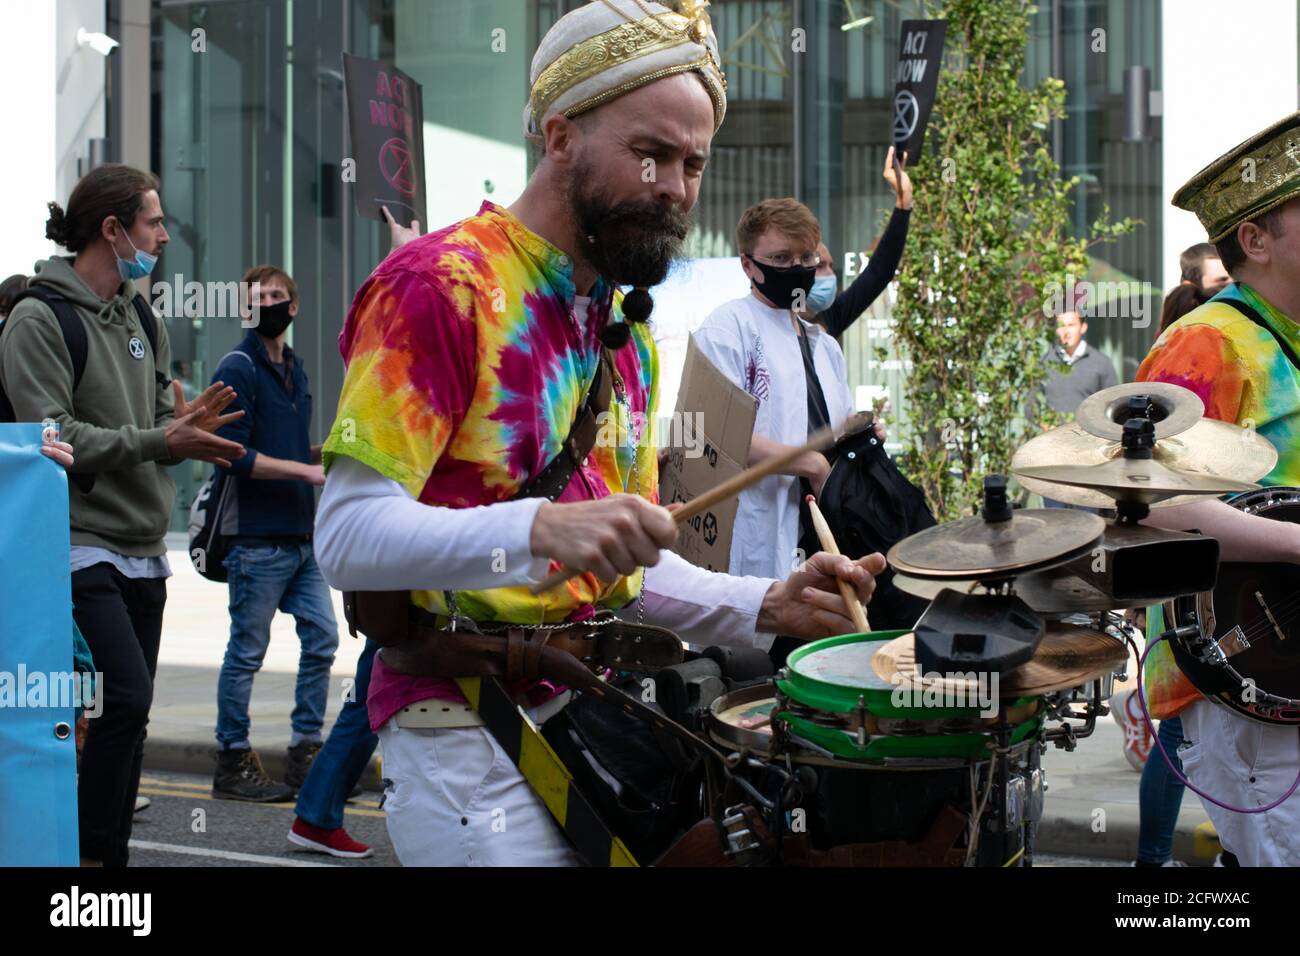 Extinction Rebellion Protest, Manchester, UK. The quiet rebellion parade led by Mr Wilson's second liners. Drummer walking in the parade. Stock Photo